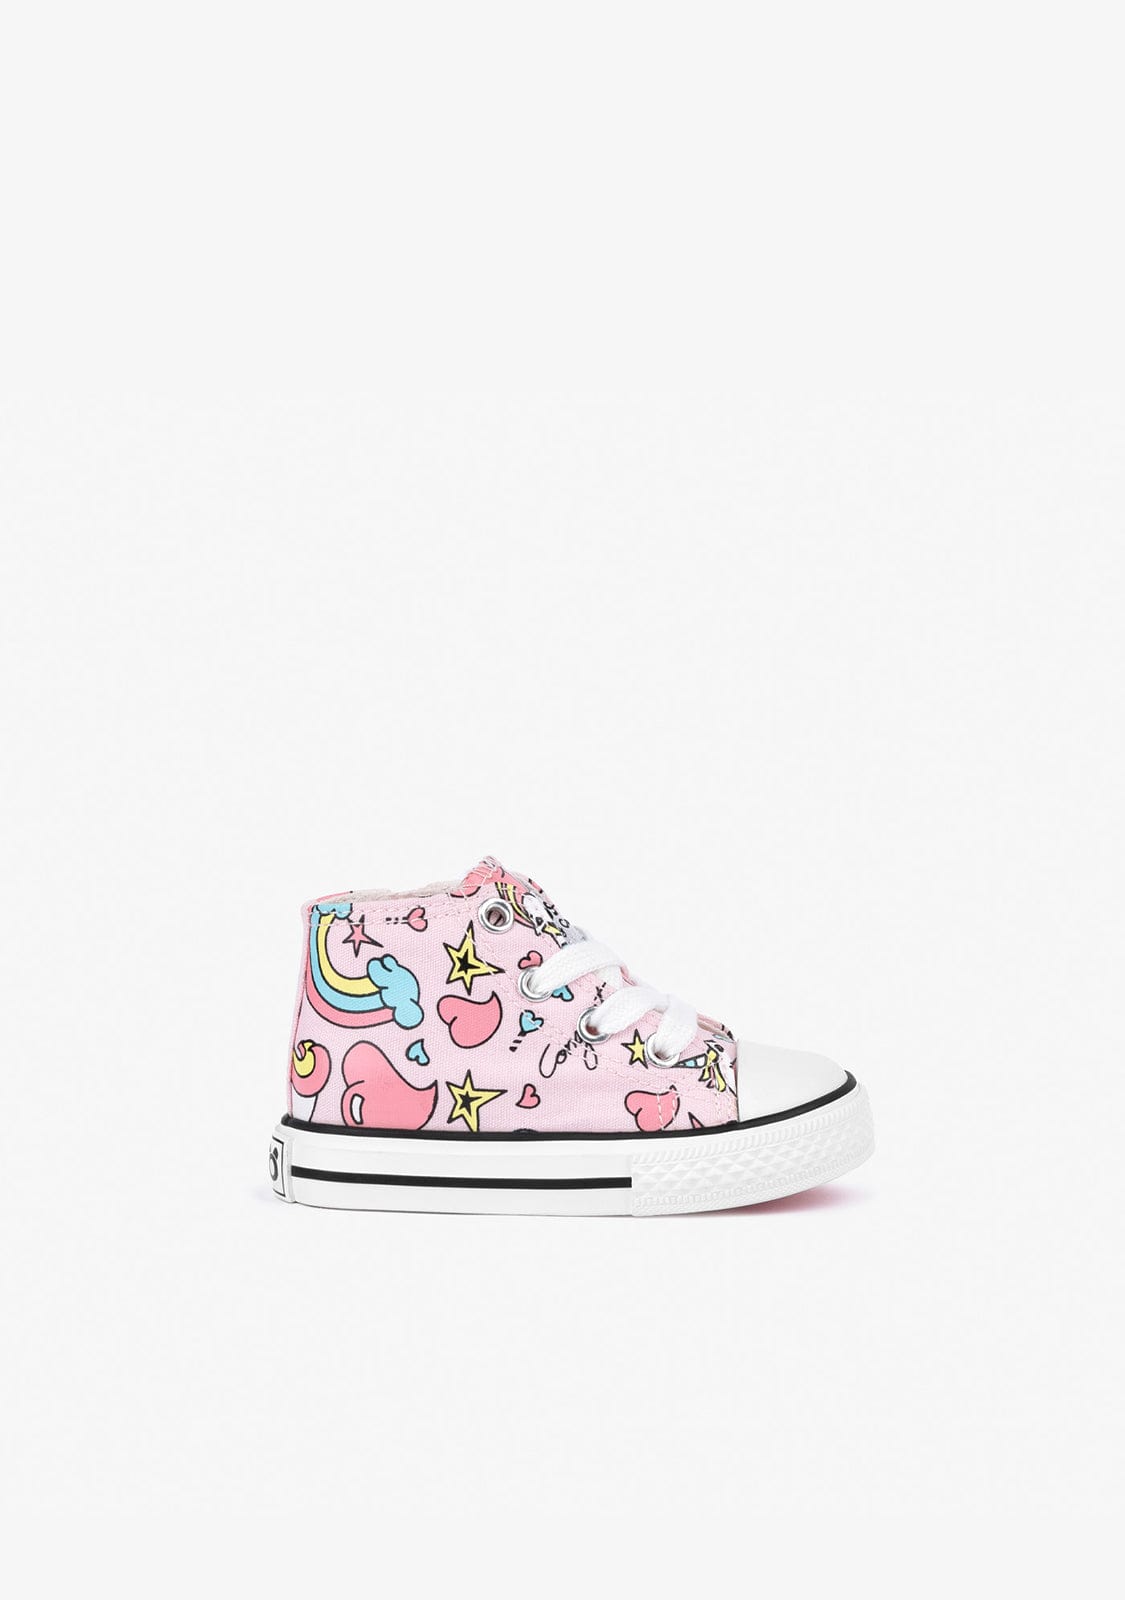 OSITO Shoes Baby's Pink Unicorn Hi-Top Sneakers